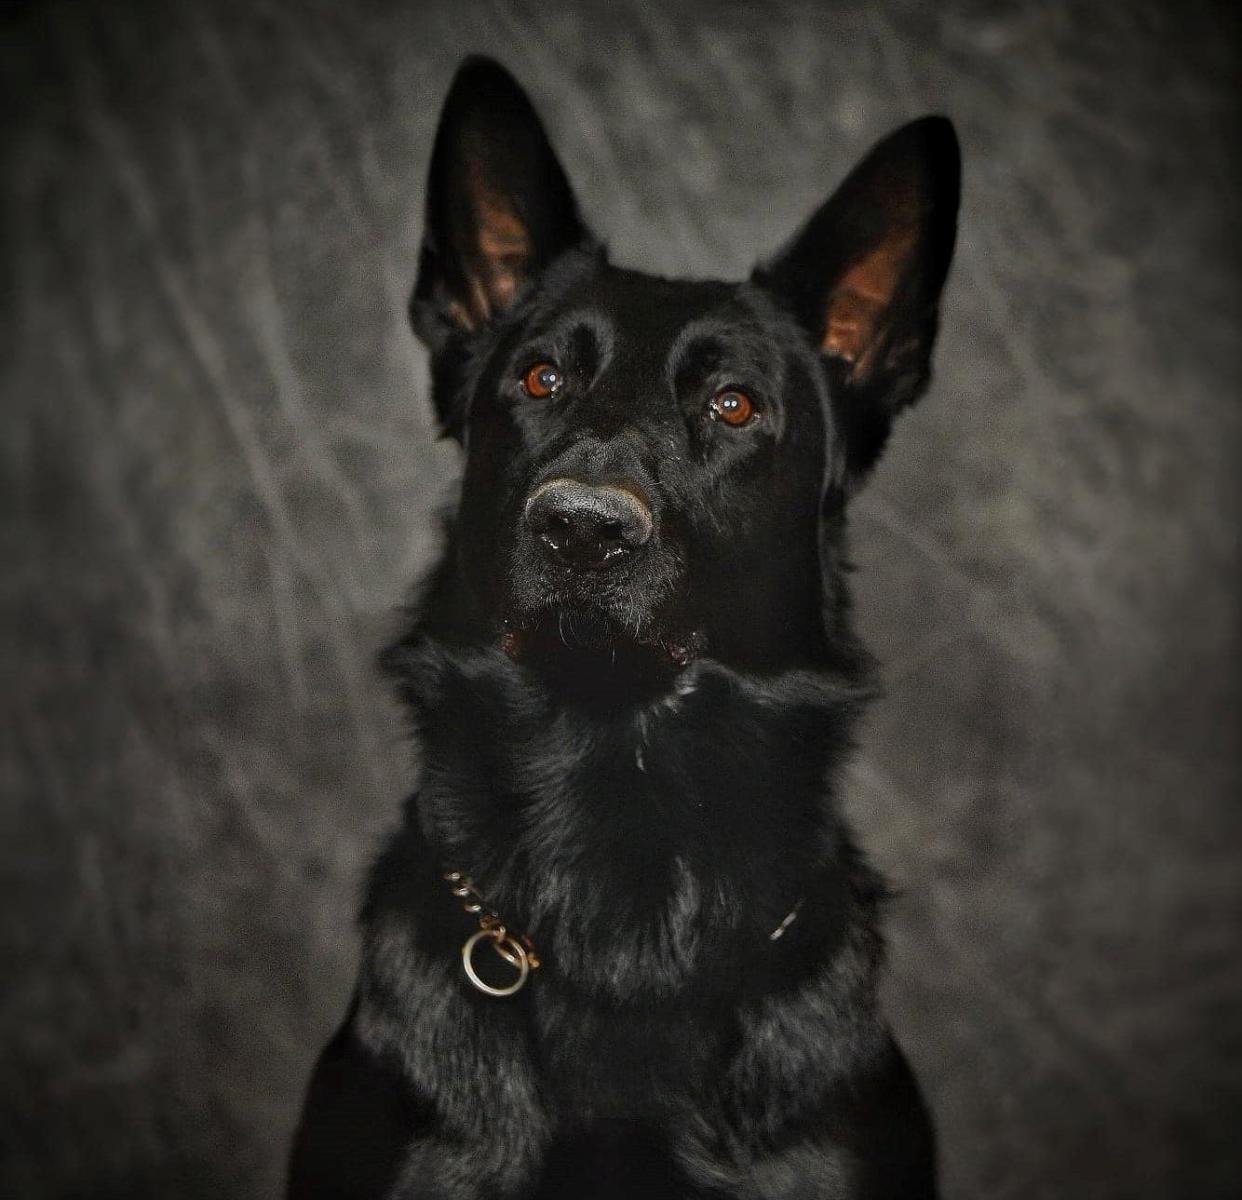 Fury, a K-9 of the Franklin Ohio Division of Police, was killed in a crash Saturday after a wrong-way driver struck a police cruiser in Warren County.